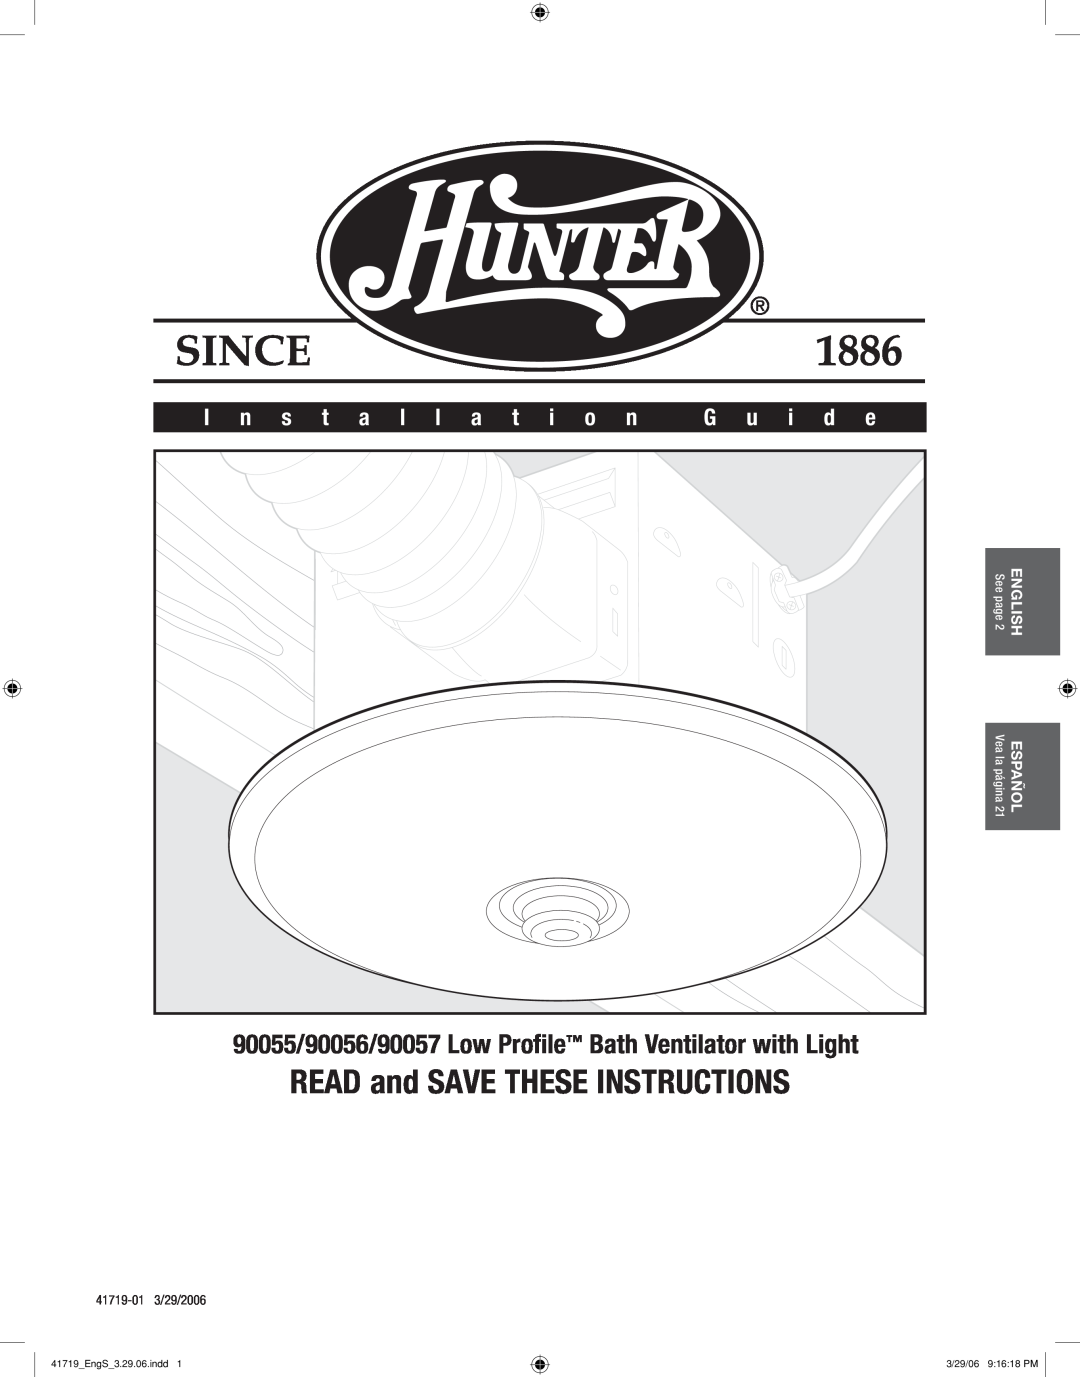 Hunter Fan manual READ and SAVE THESE INSTRUCTIONS, 90055/90056/90057 Low Profile Bath Ventilator with Light, G u i d e 